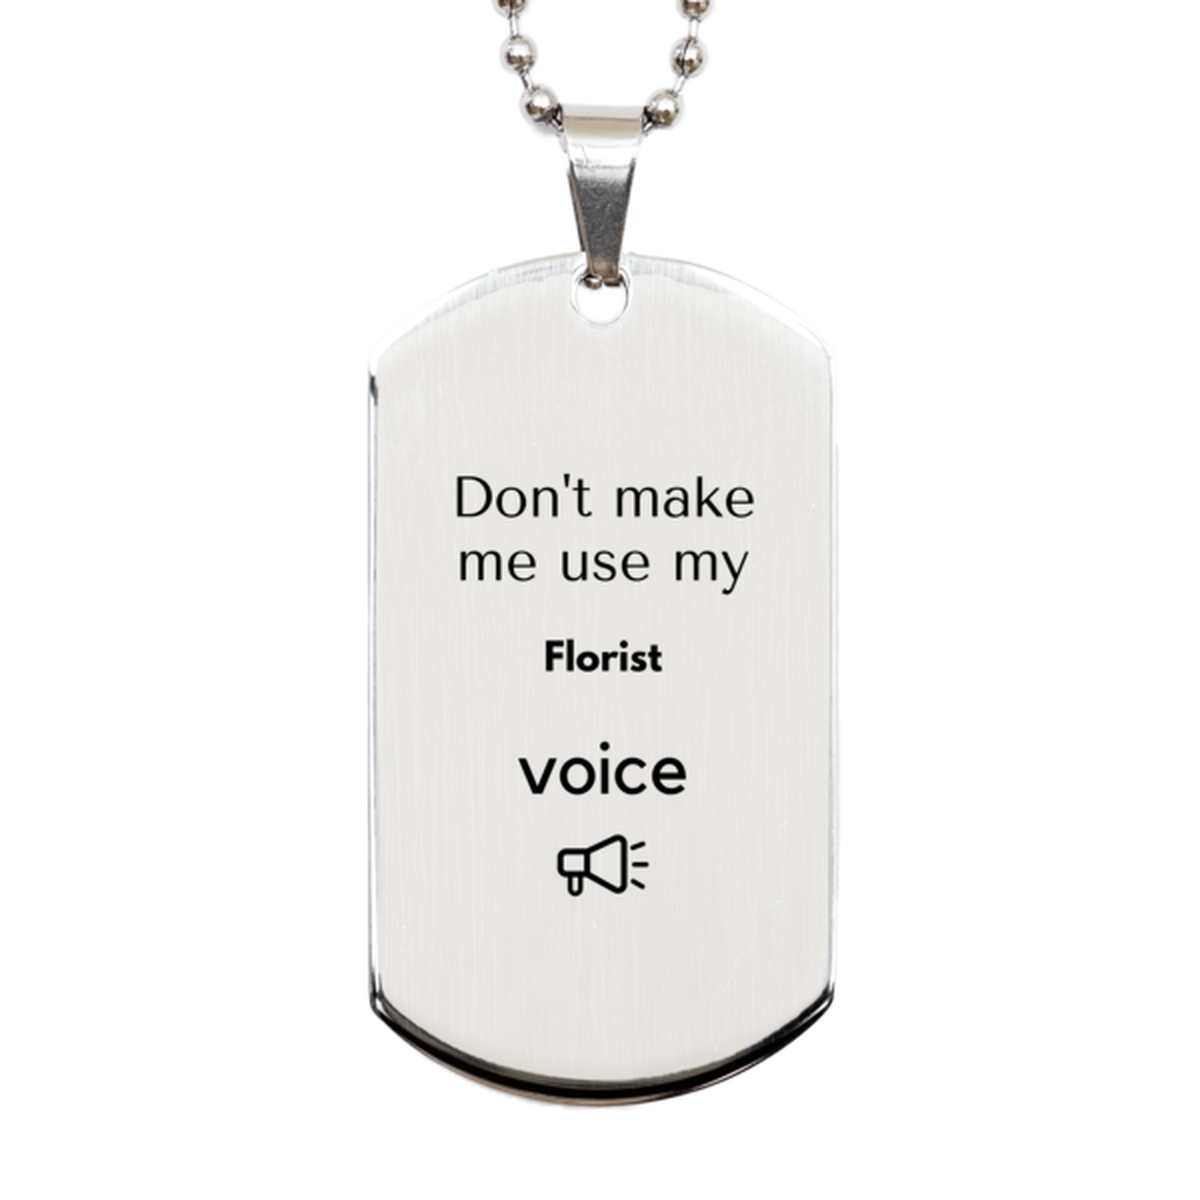 Don't make me use my Florist voice, Sarcasm Florist Gifts, Christmas Florist Silver Dog Tag Birthday Unique Gifts For Florist Coworkers, Men, Women, Colleague, Friends